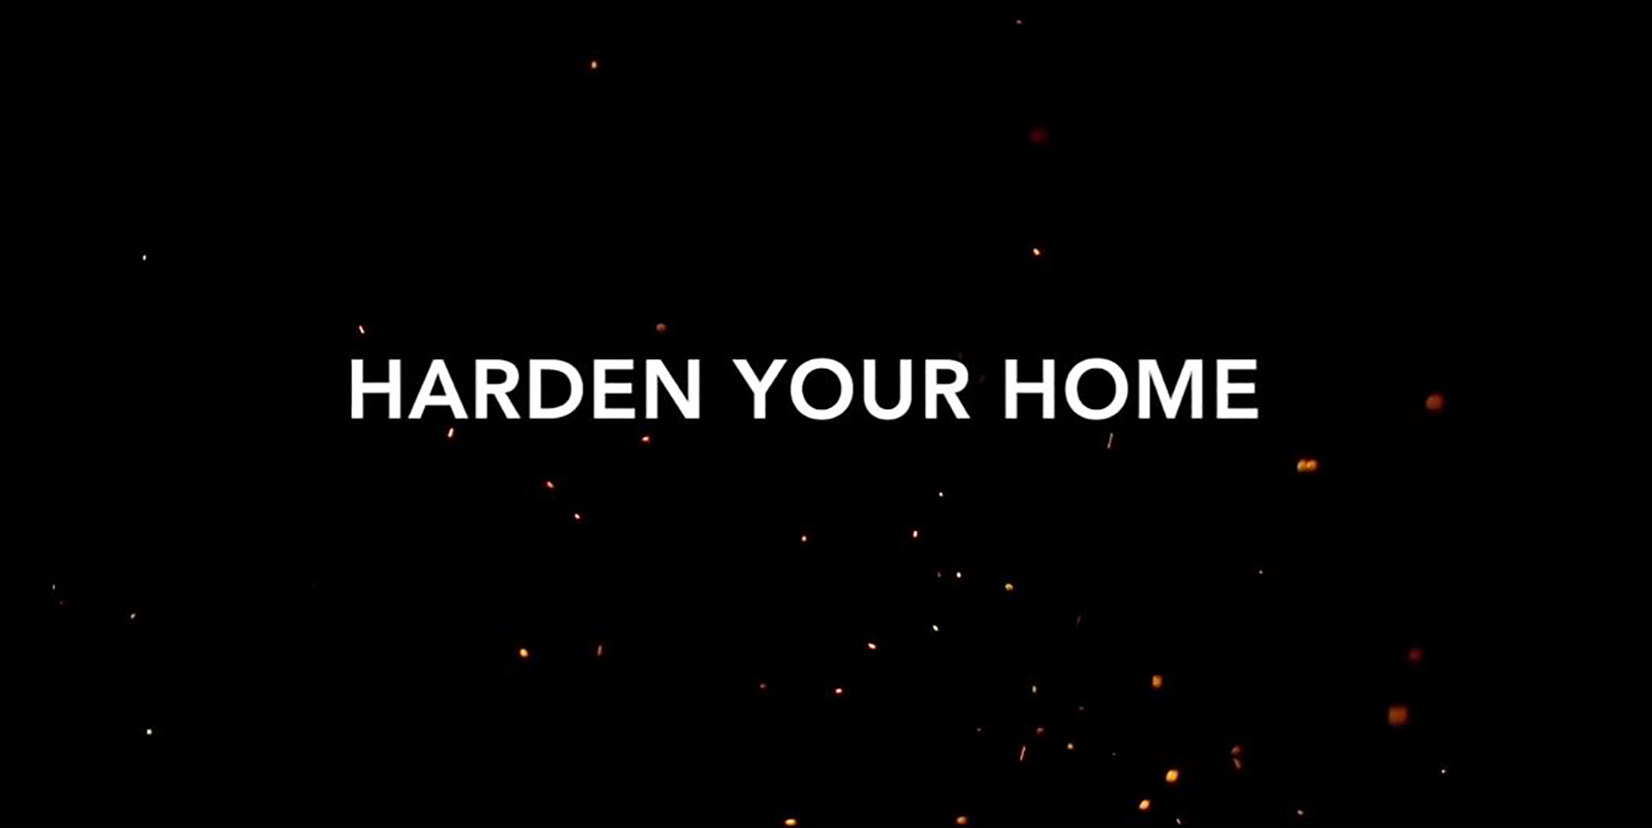 harden your home intro photo.